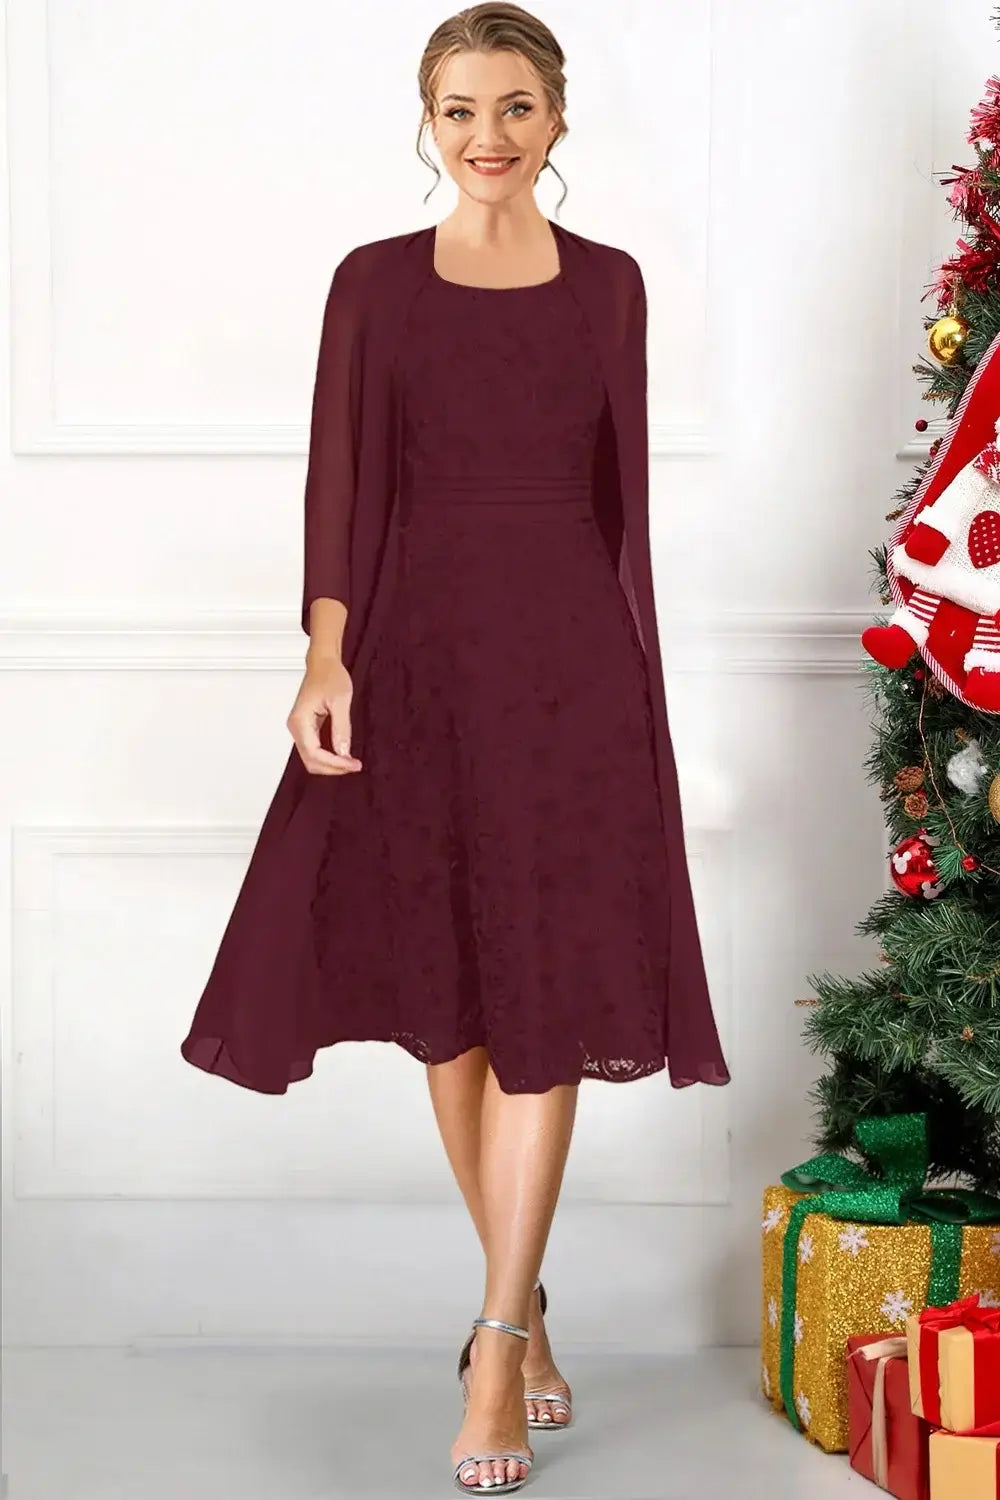 The Bride Formal Burgundy Two Pieces Midi Dress With Jacket